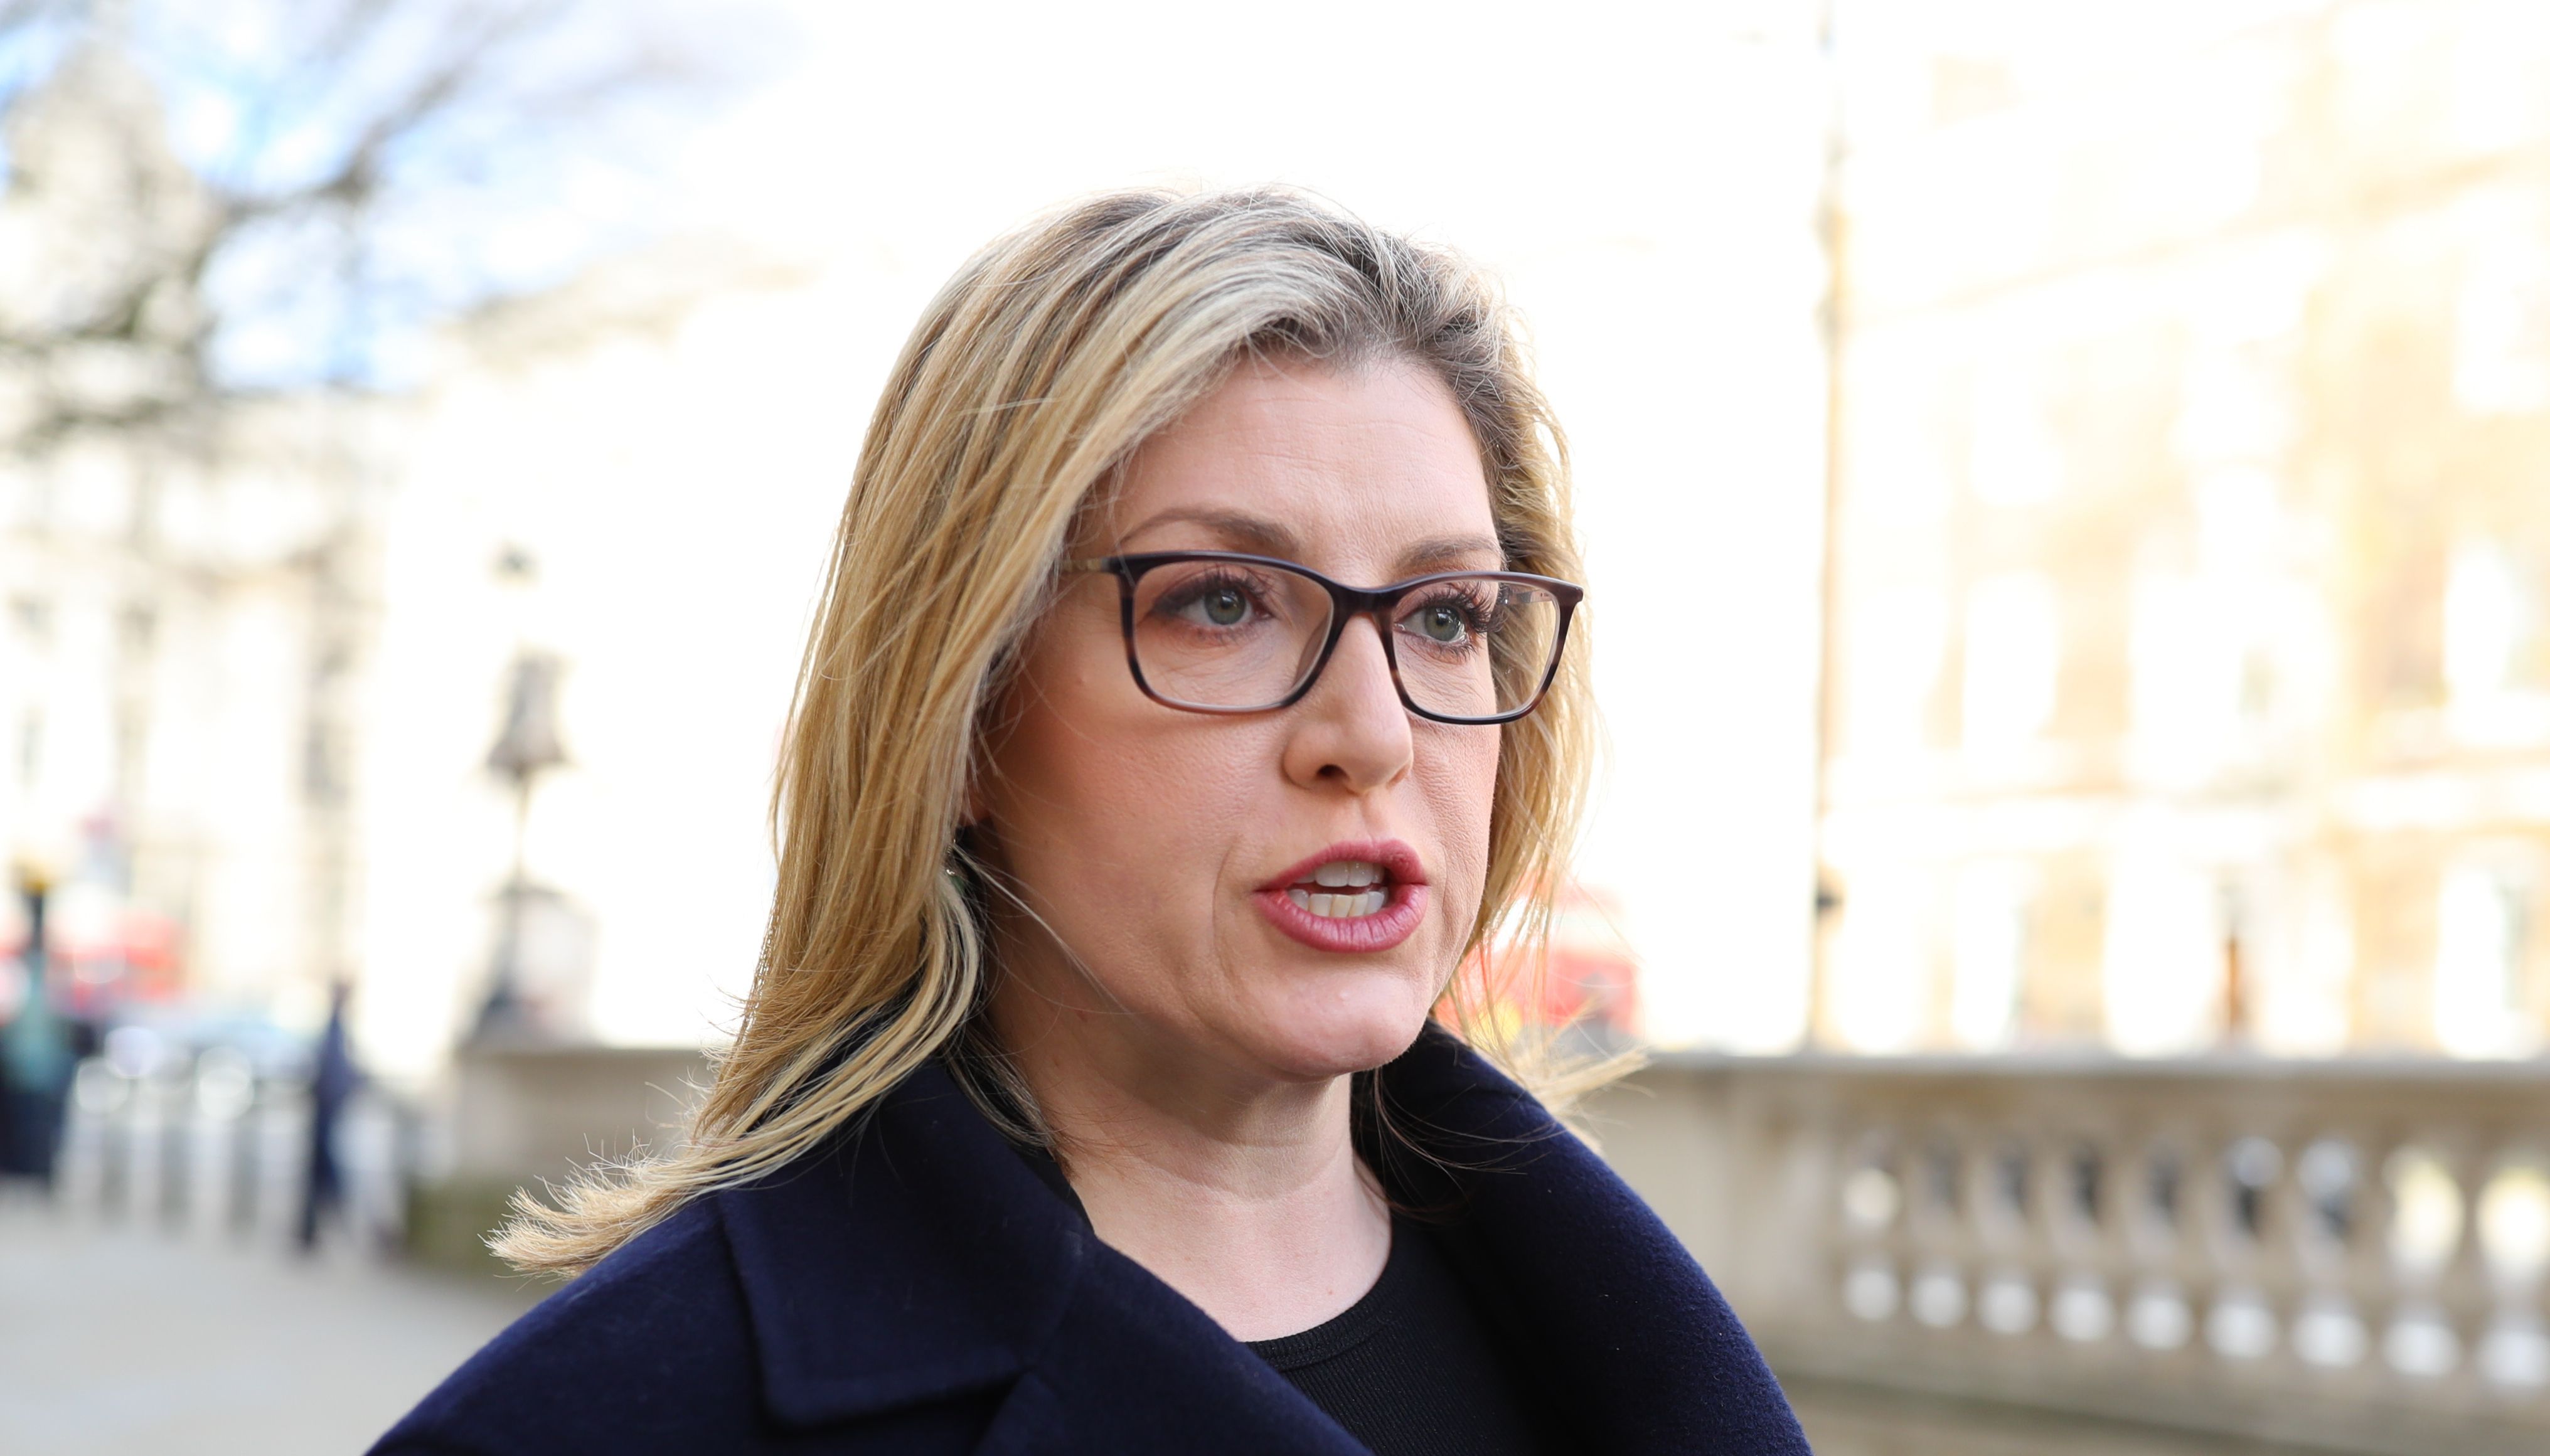 Penny Mordaunt remains the bookies favourite to become the next Prime Minister